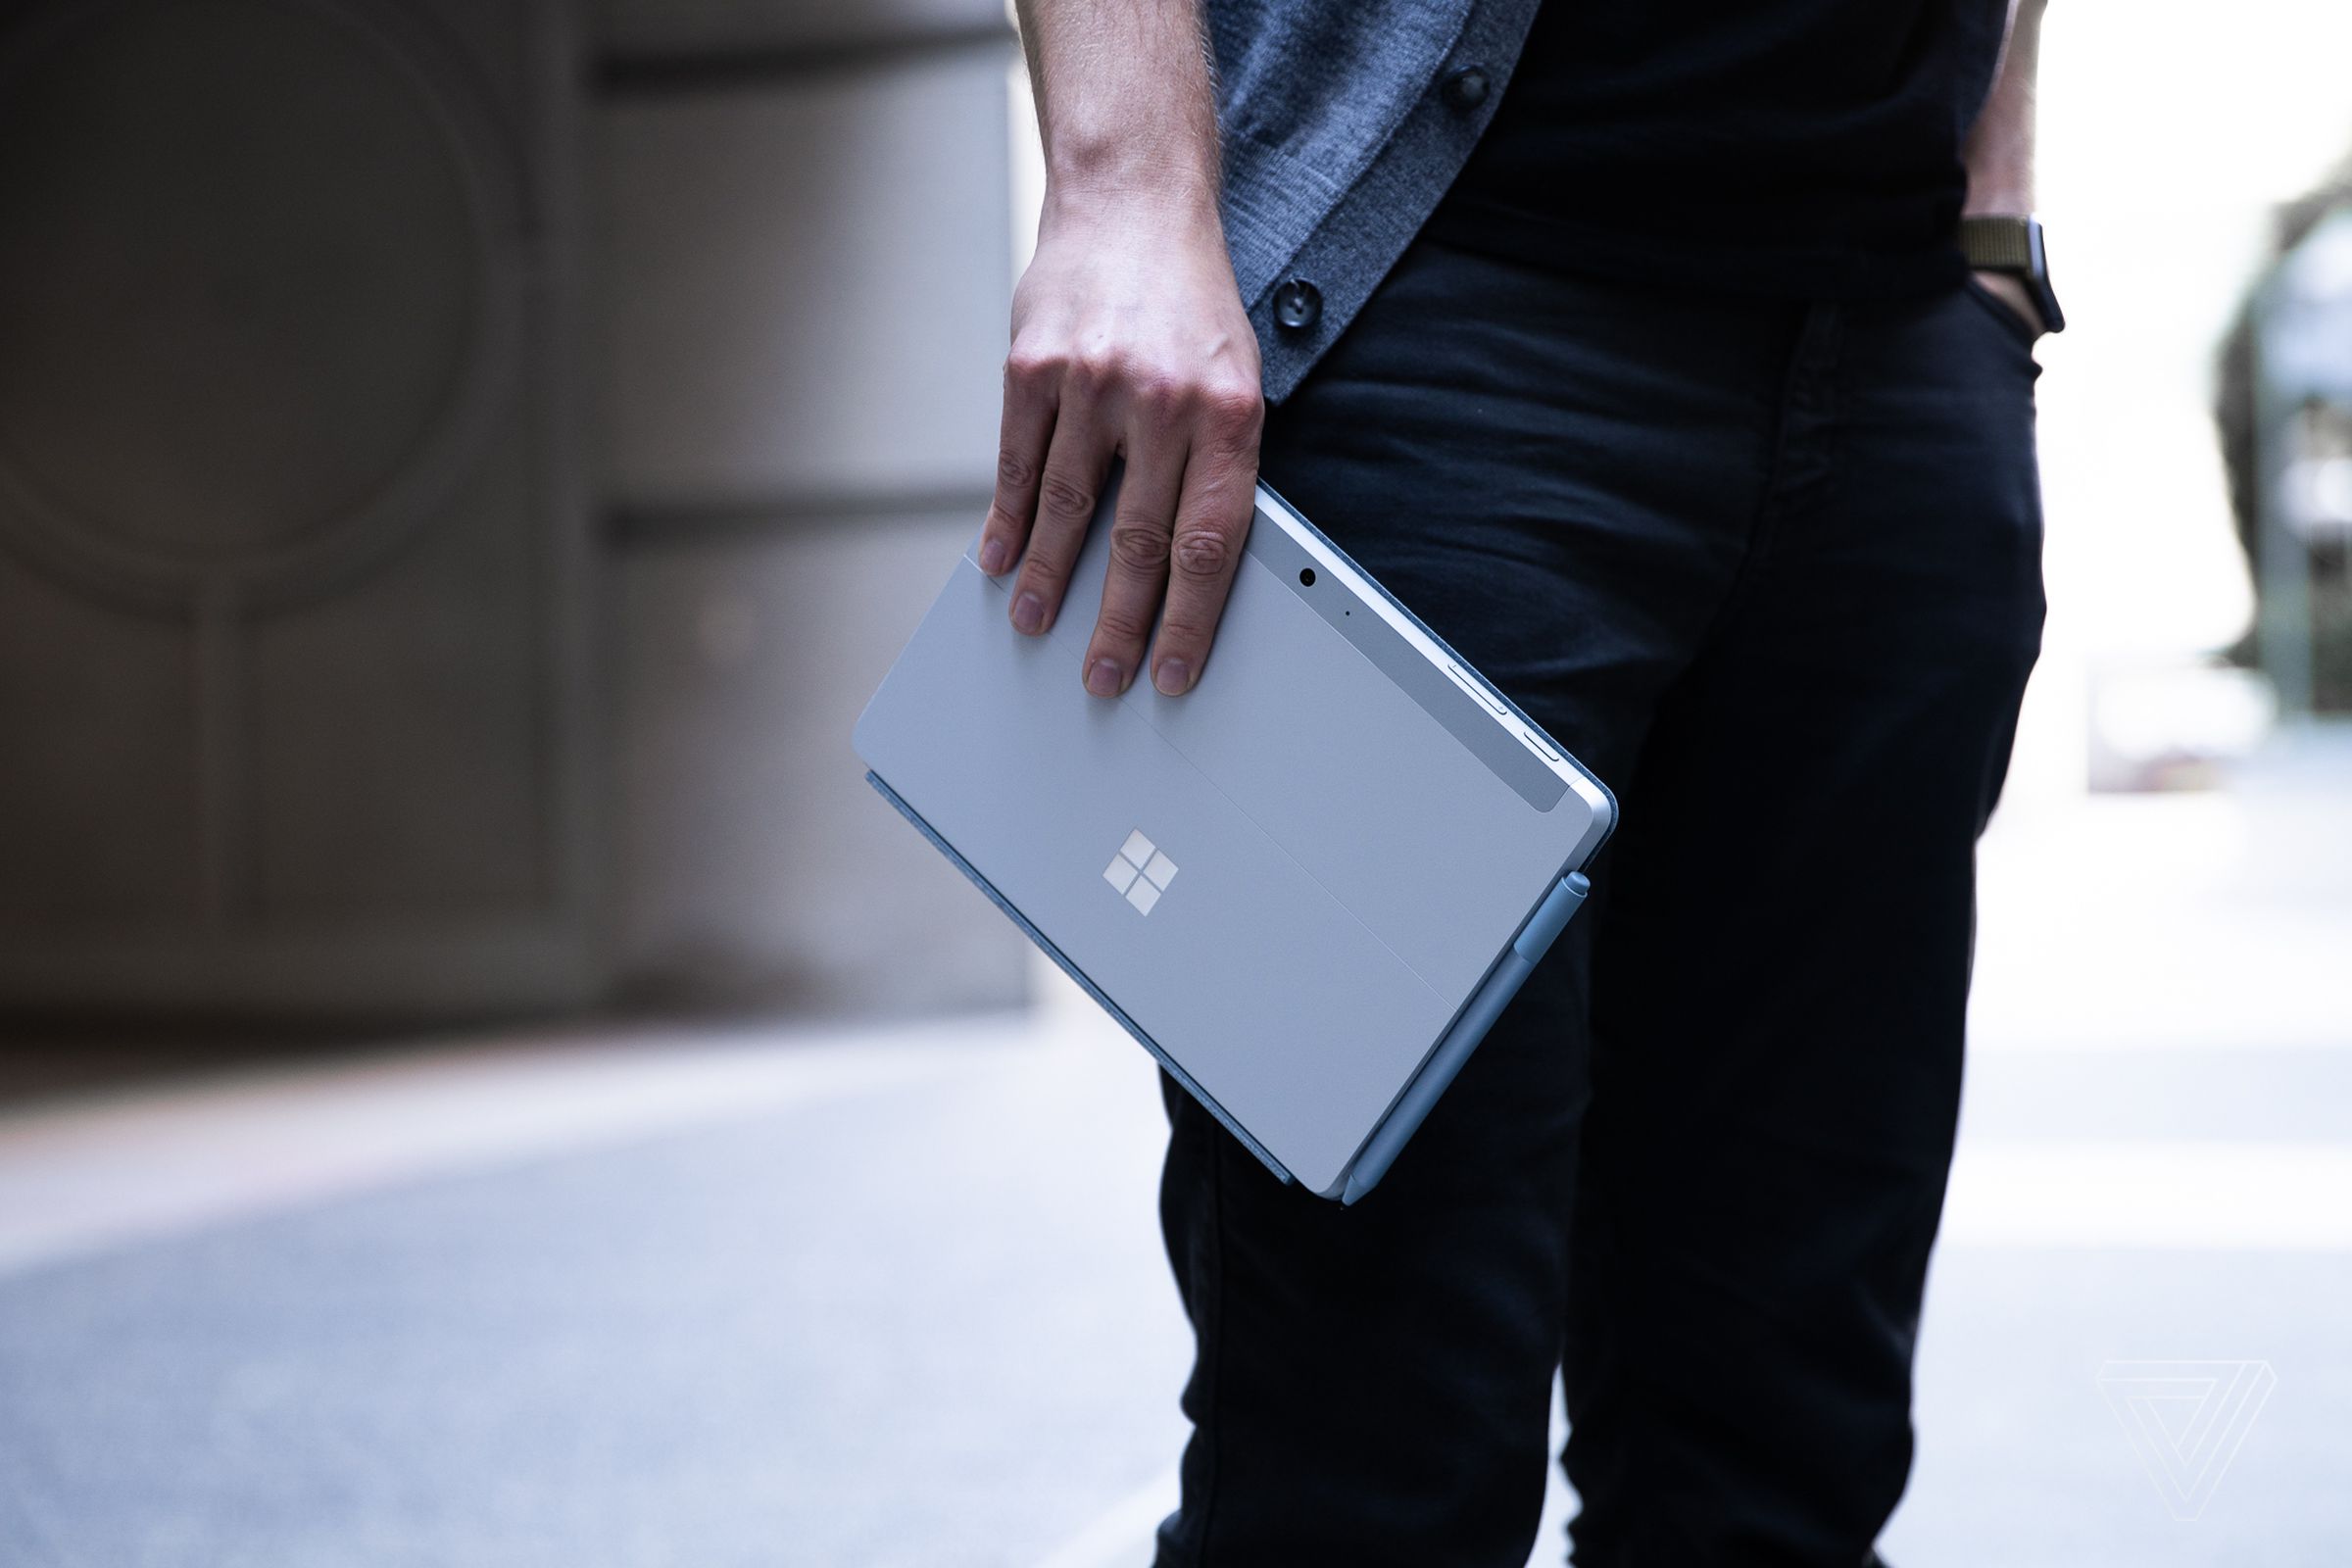 Microsoft just launched the affordable Surface Go 3, but maybe it will reveal new hardware at an education-focused event on Tuesday.